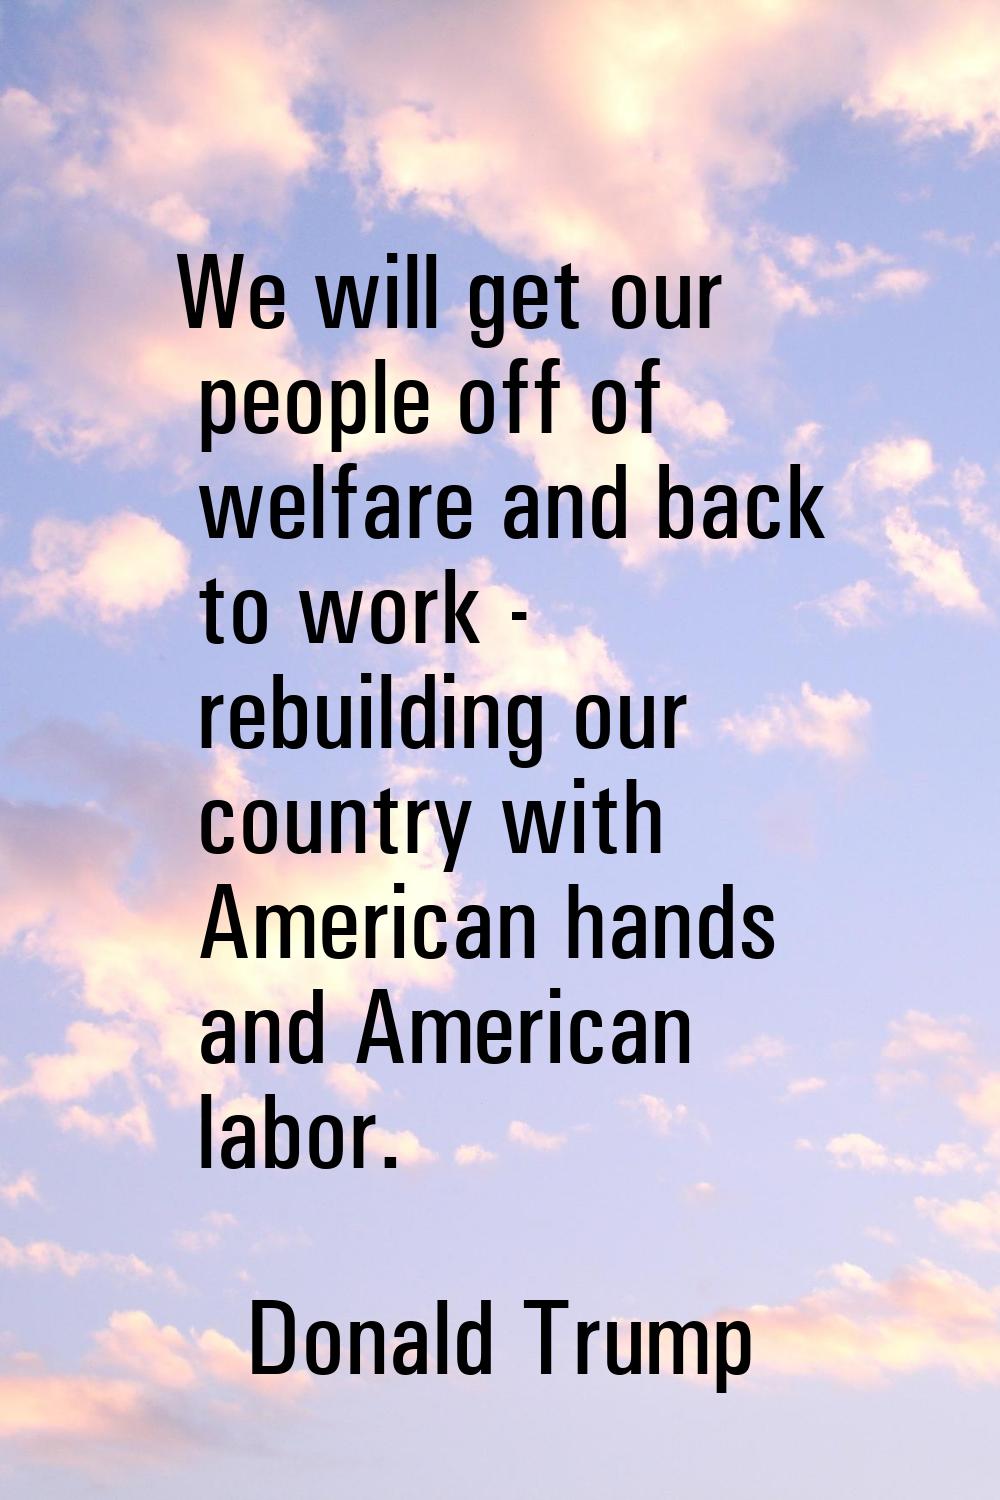 We will get our people off of welfare and back to work - rebuilding our country with American hands